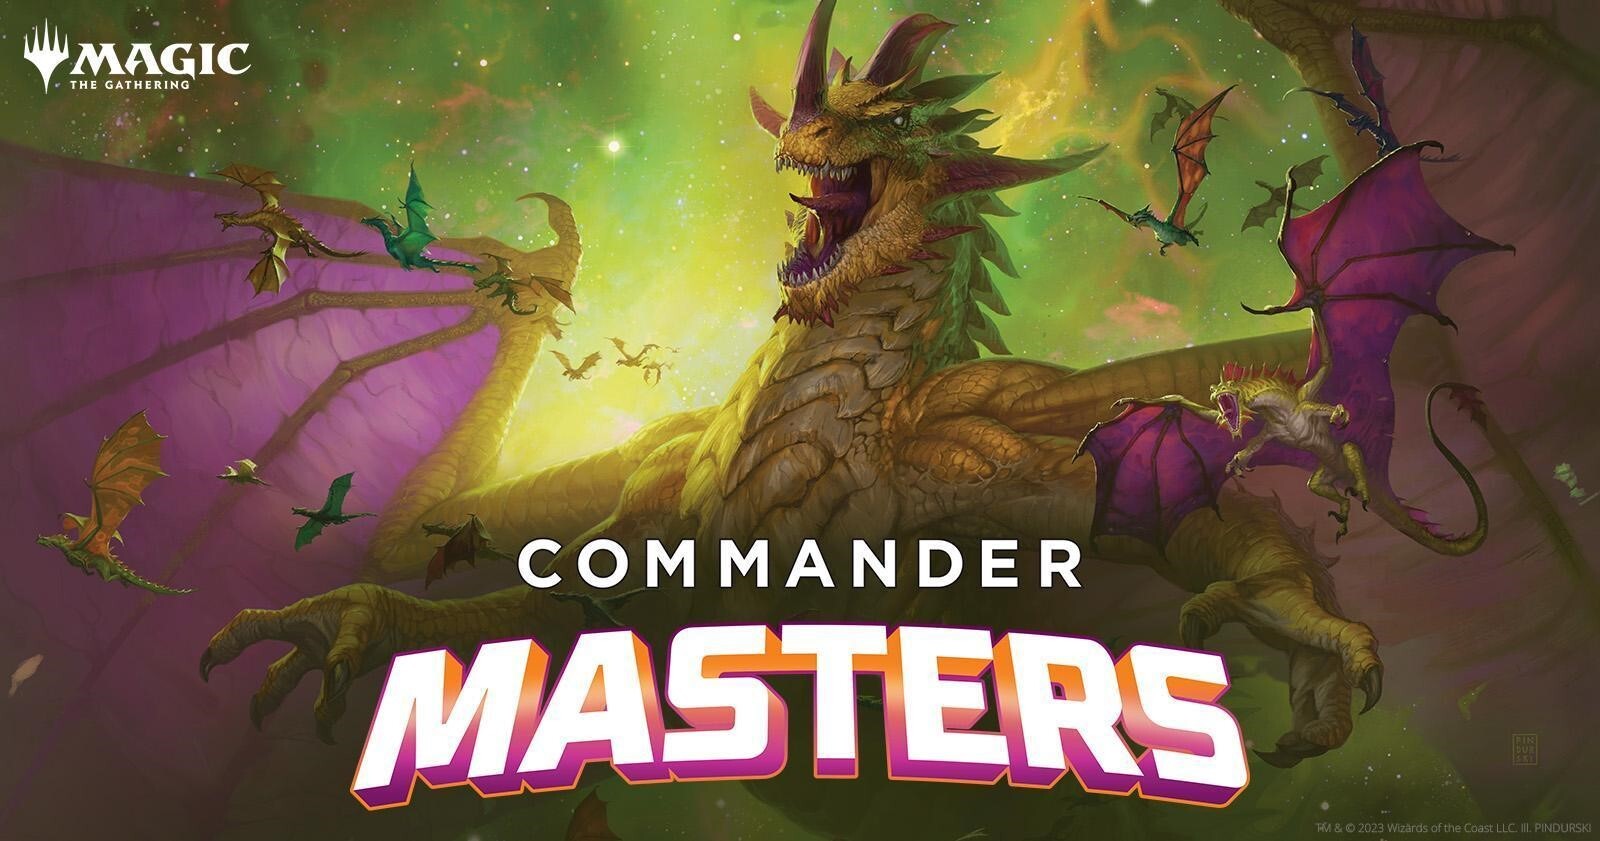 magic-the-gathering-commanders-masters-release-1.jpeg